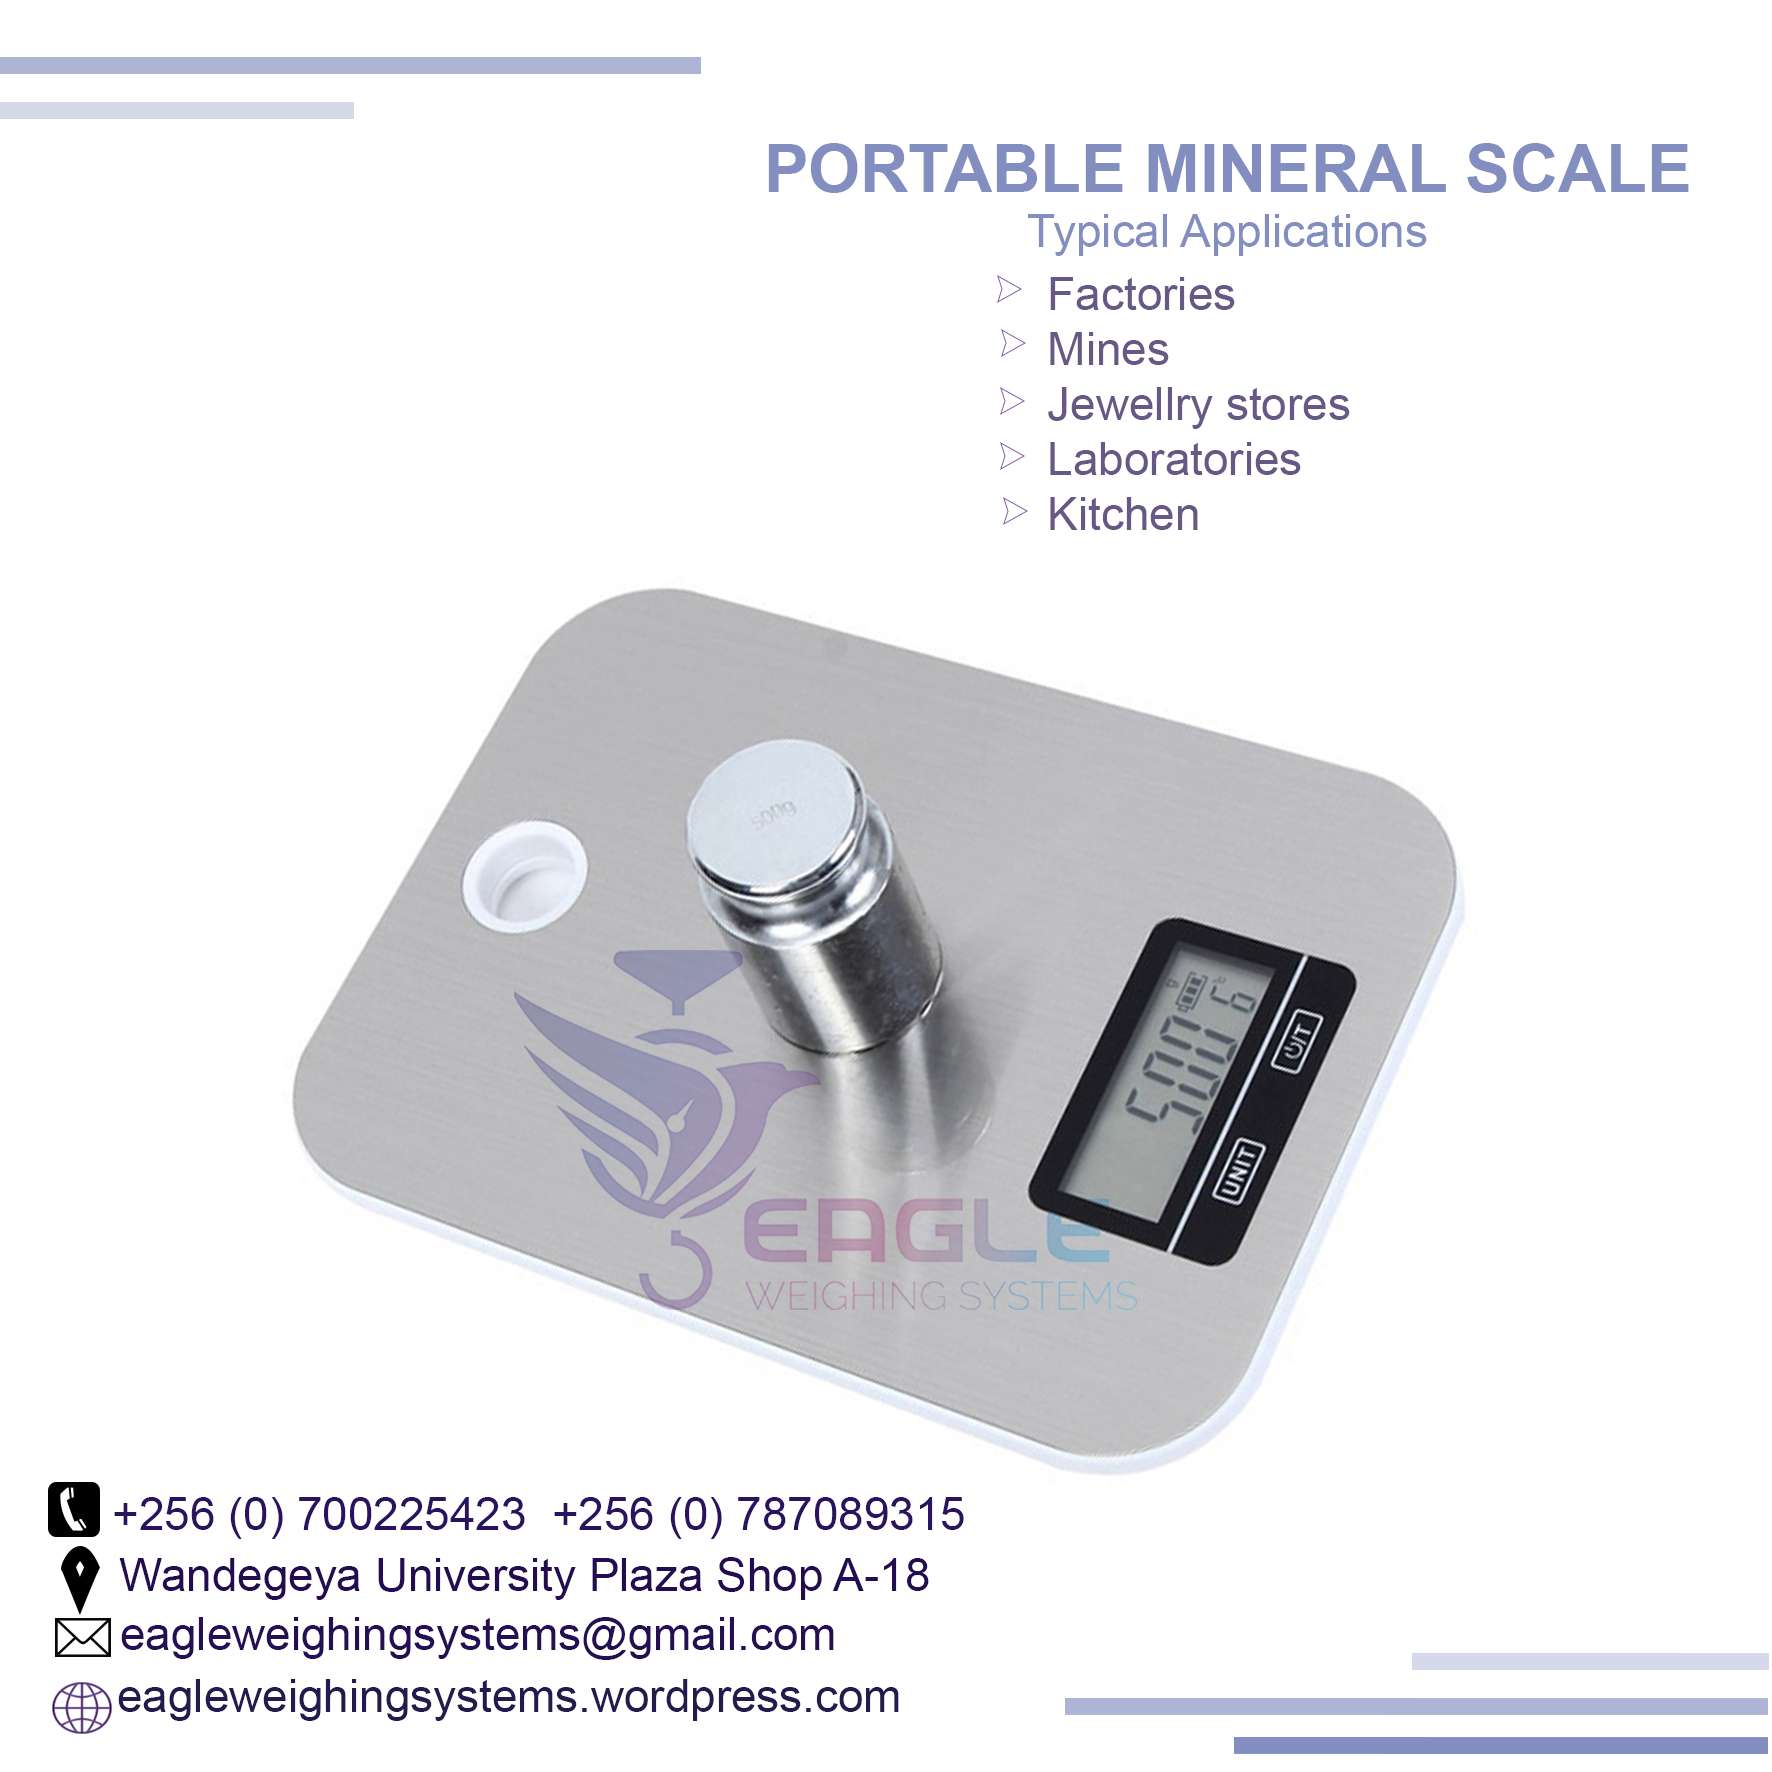 Accurate Portable mineral, jewelry weighing scales in Kampala Uganda, Kampala Central Division, Central, Uganda